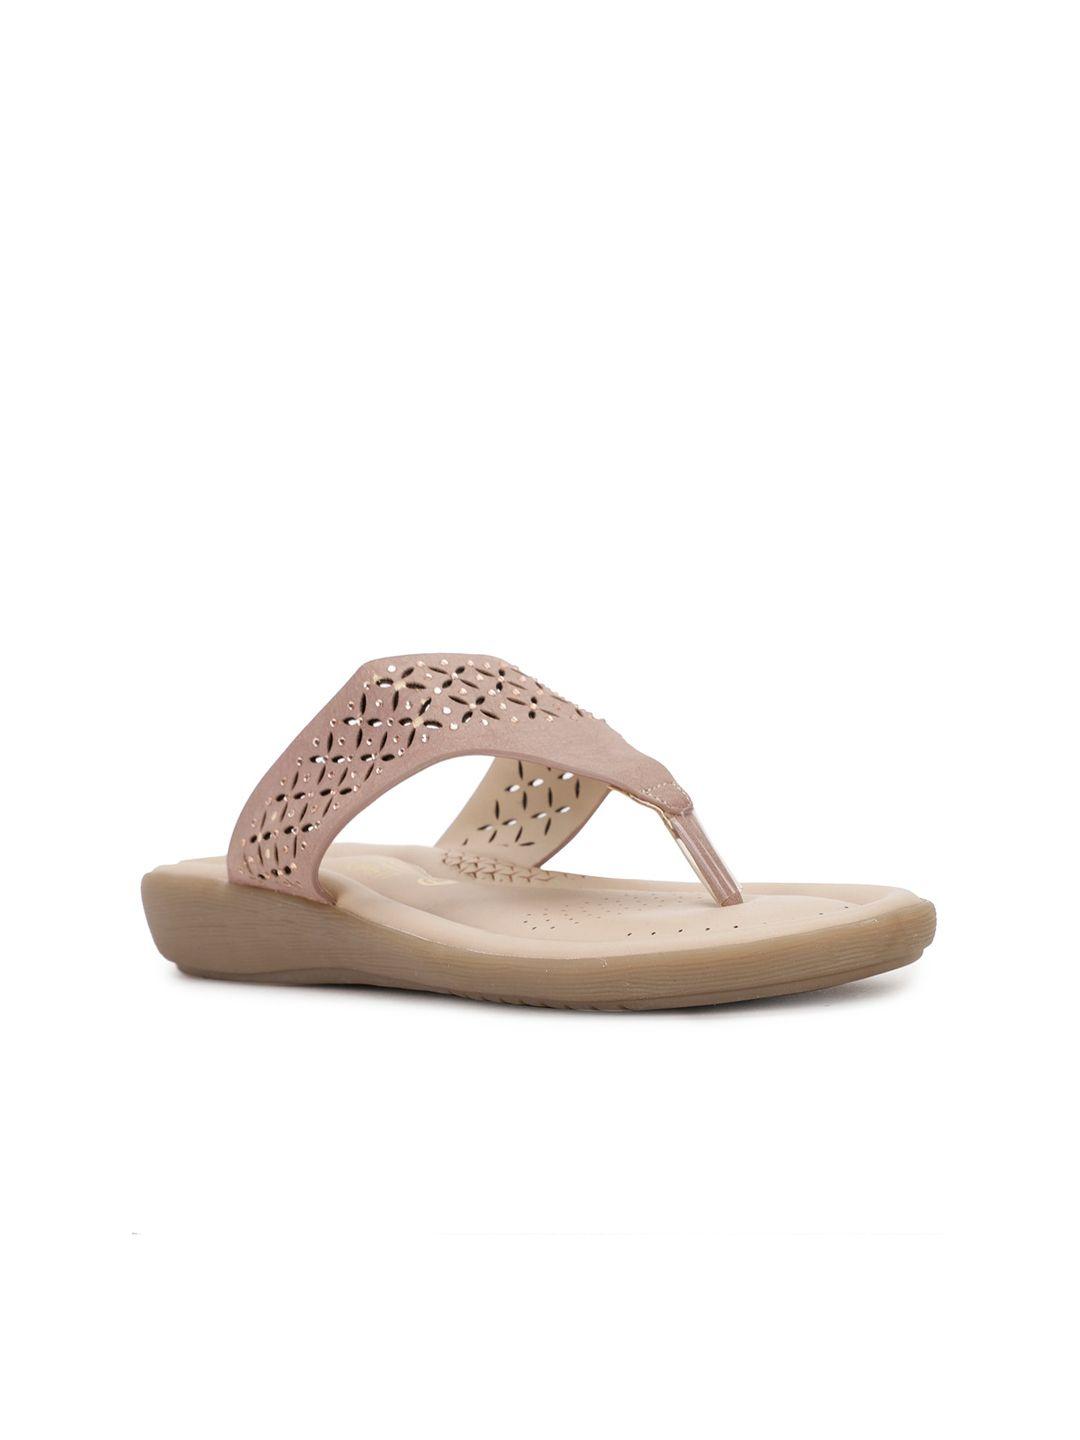 bata women pink t-strap flats with laser cuts